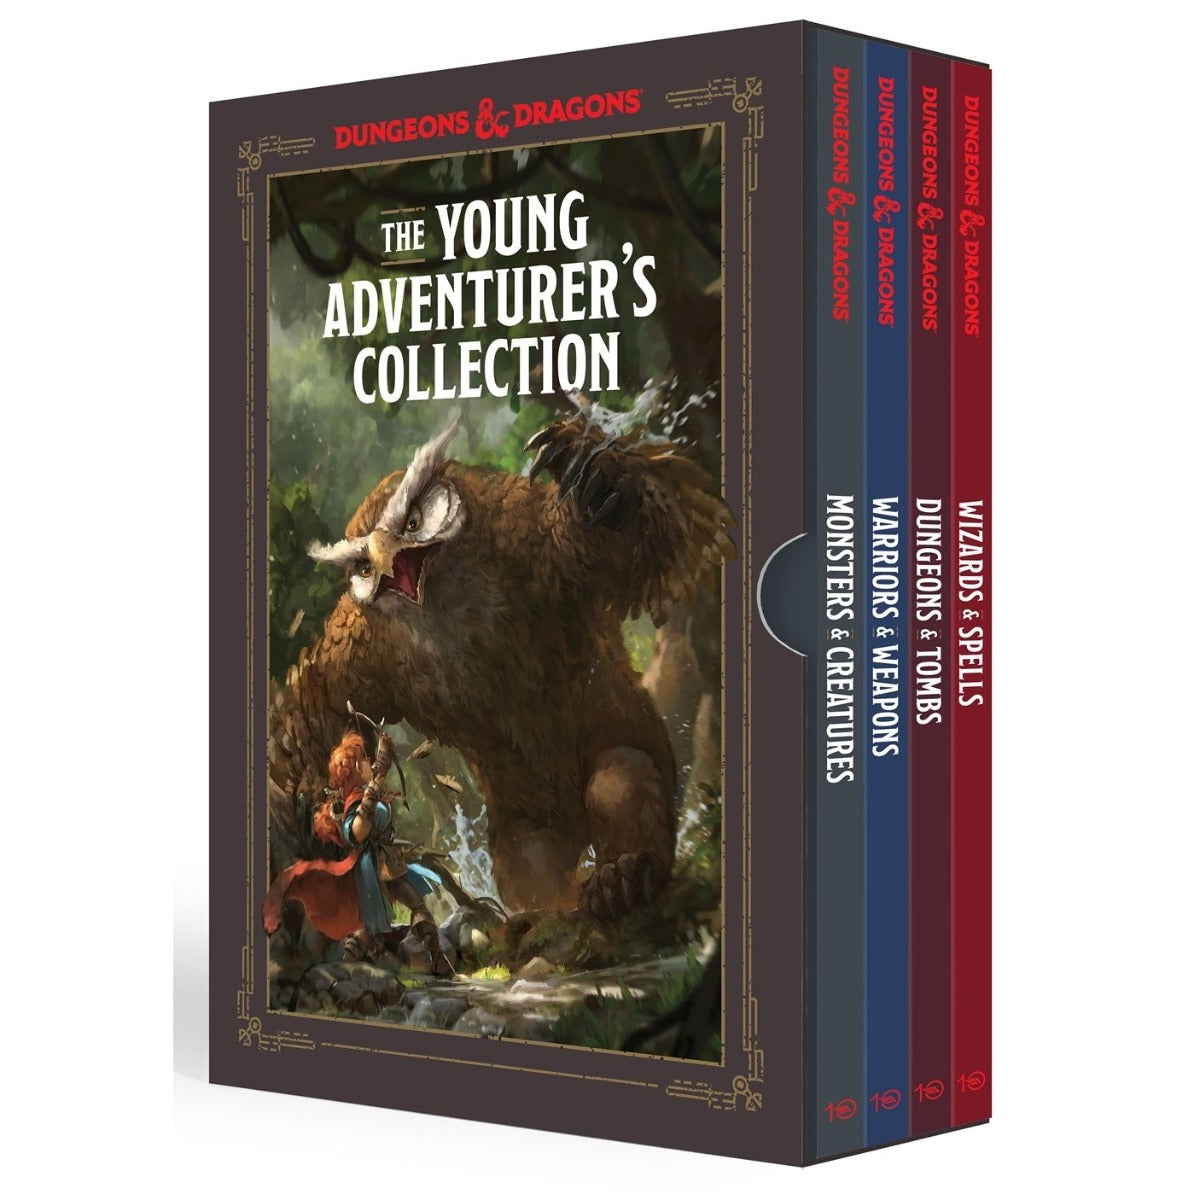 D&D Dungeons & Dragons The Young Adventurer's Collection